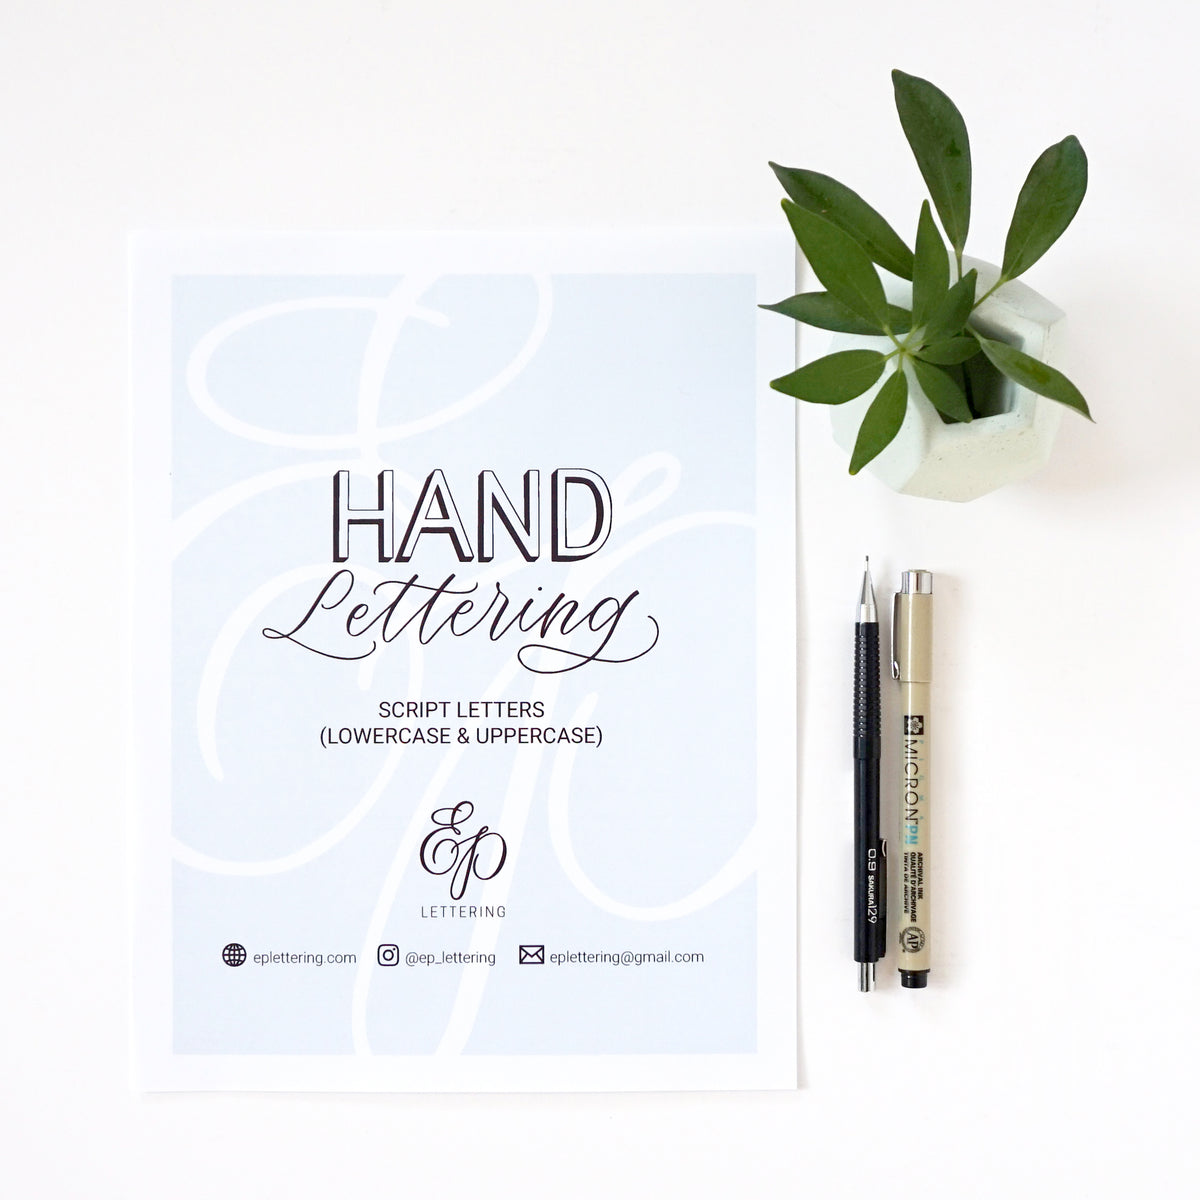 Erica Pinto Hand Lettering - Hand Lettering Bundle (2 PDFs) - Includes &#39;Hand Lettering - Script Letters&#39; + &#39;Hand Lettering - Serif &amp; Sans Serif Letters&#39;